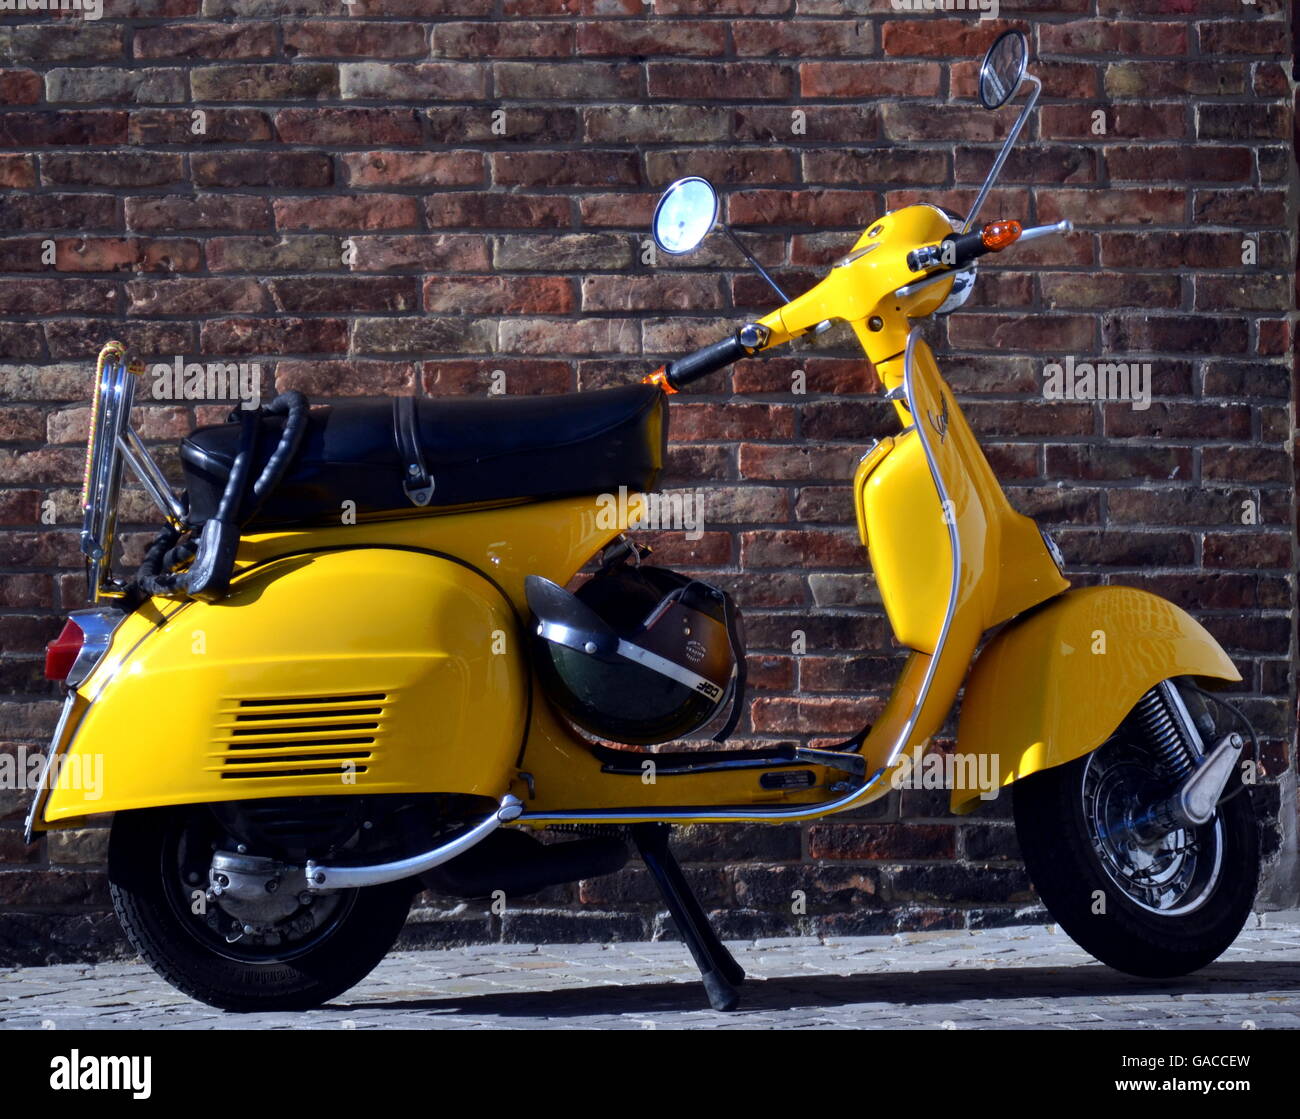 Vespa -Yellow Vespa scooter parked against brick wall Stock Photo